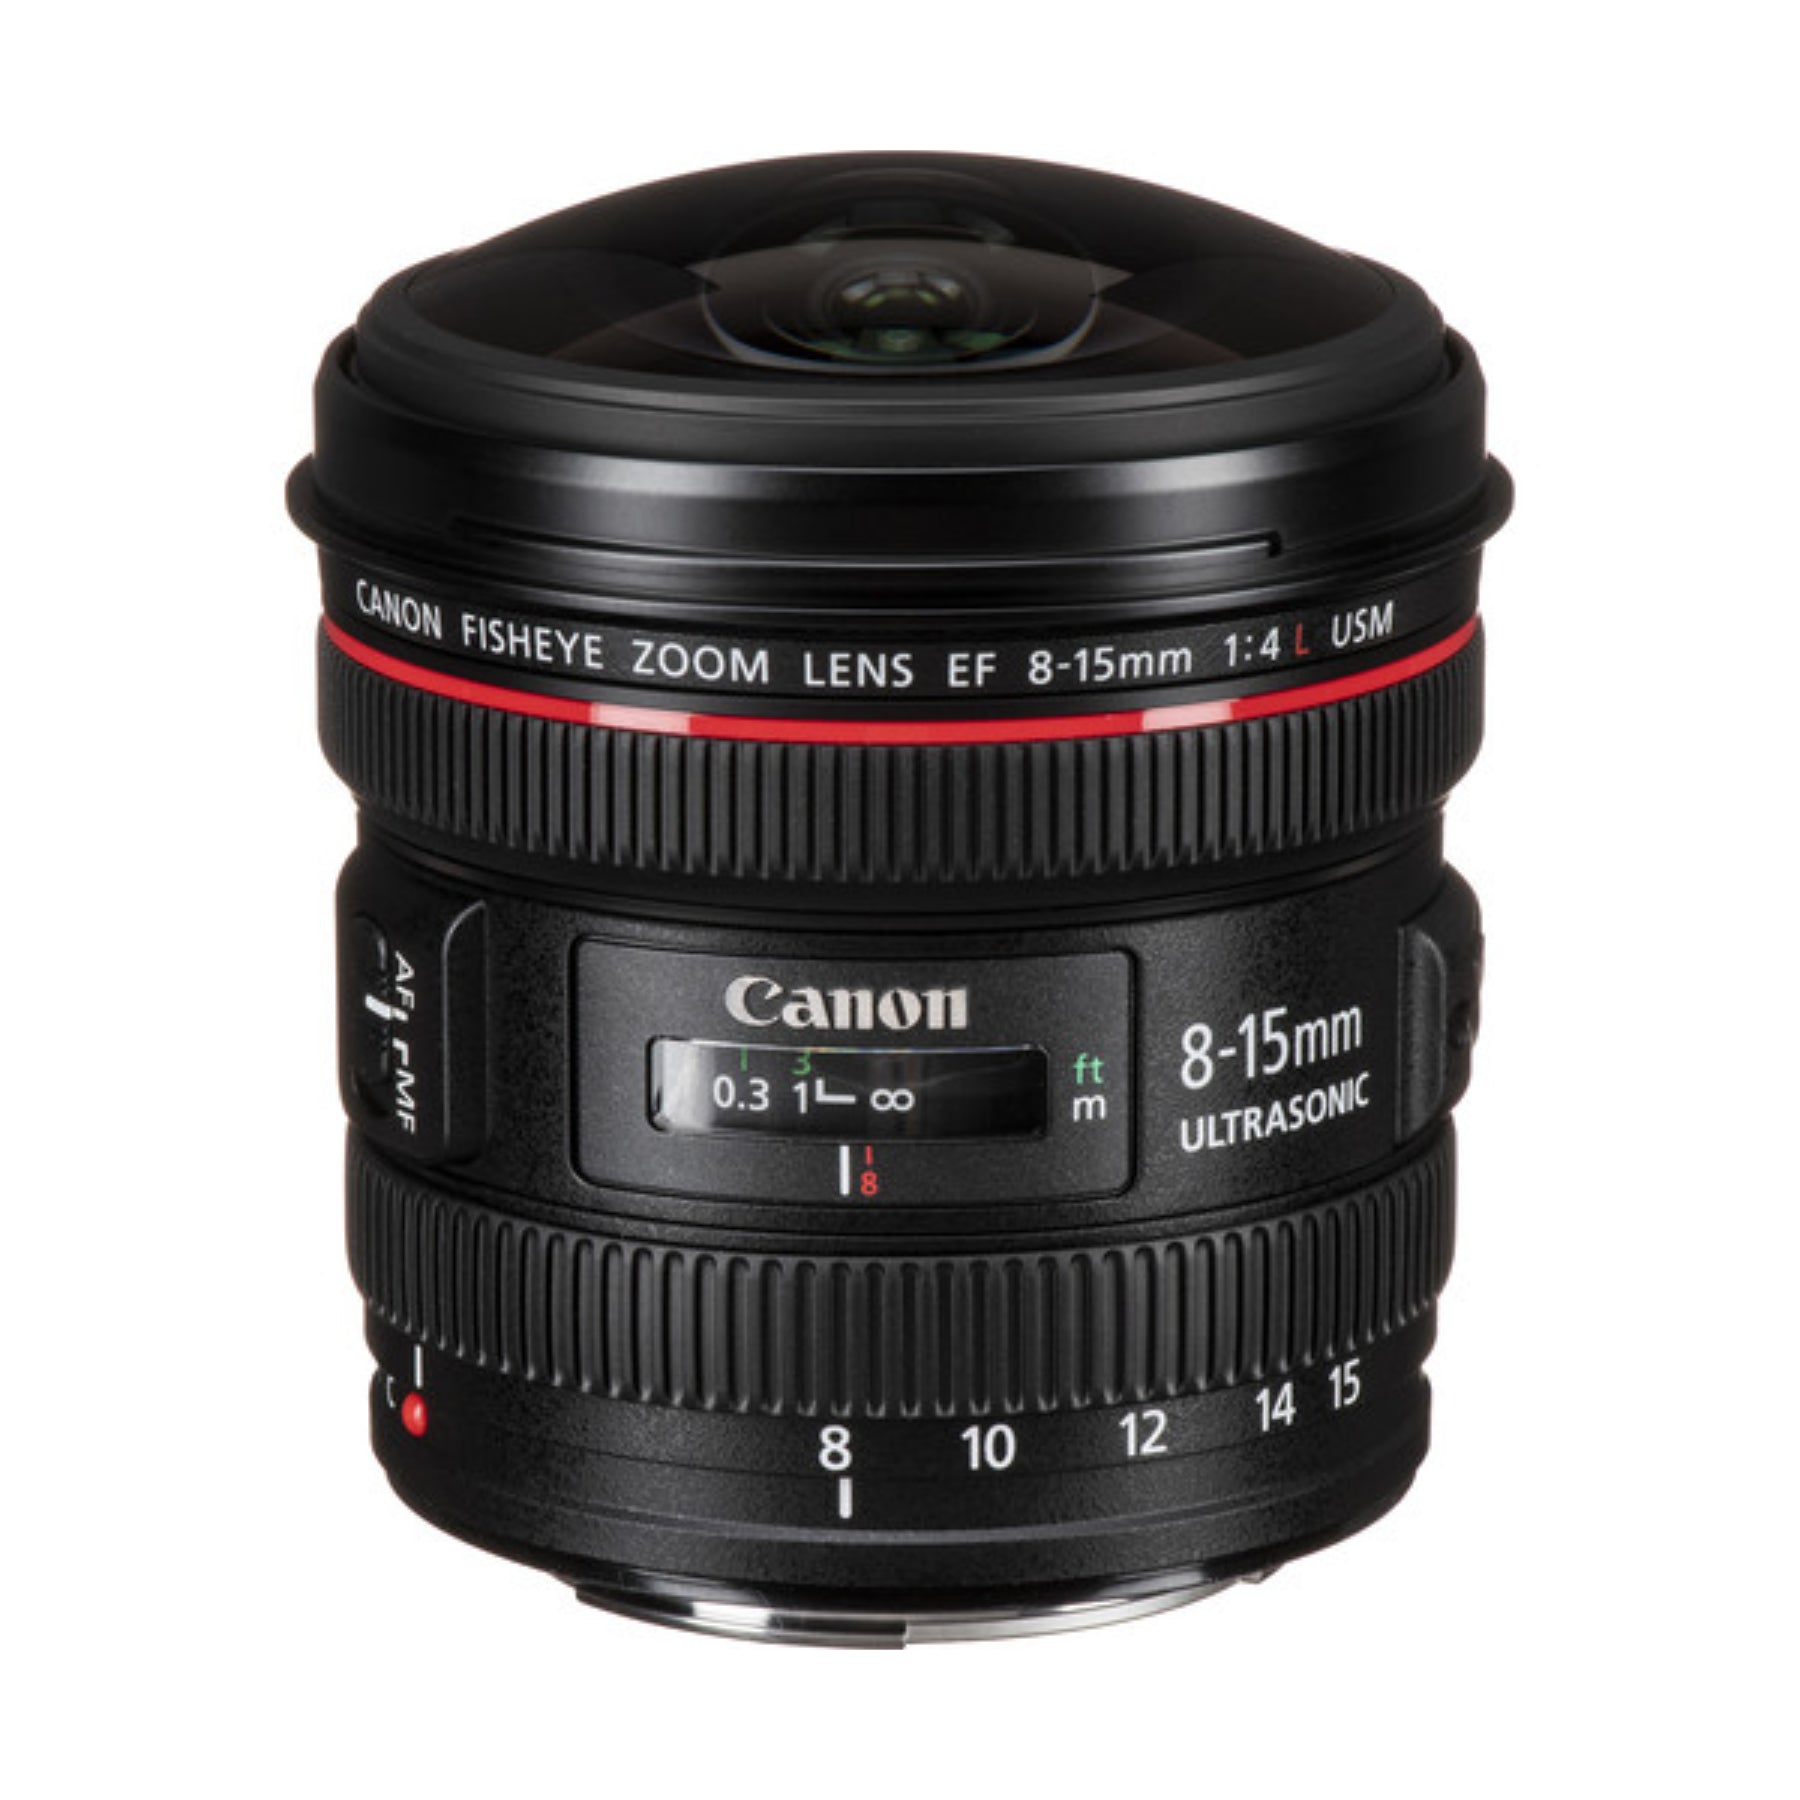 Canon fish eye 8 - 15mm lens for hire at Topic Rentals